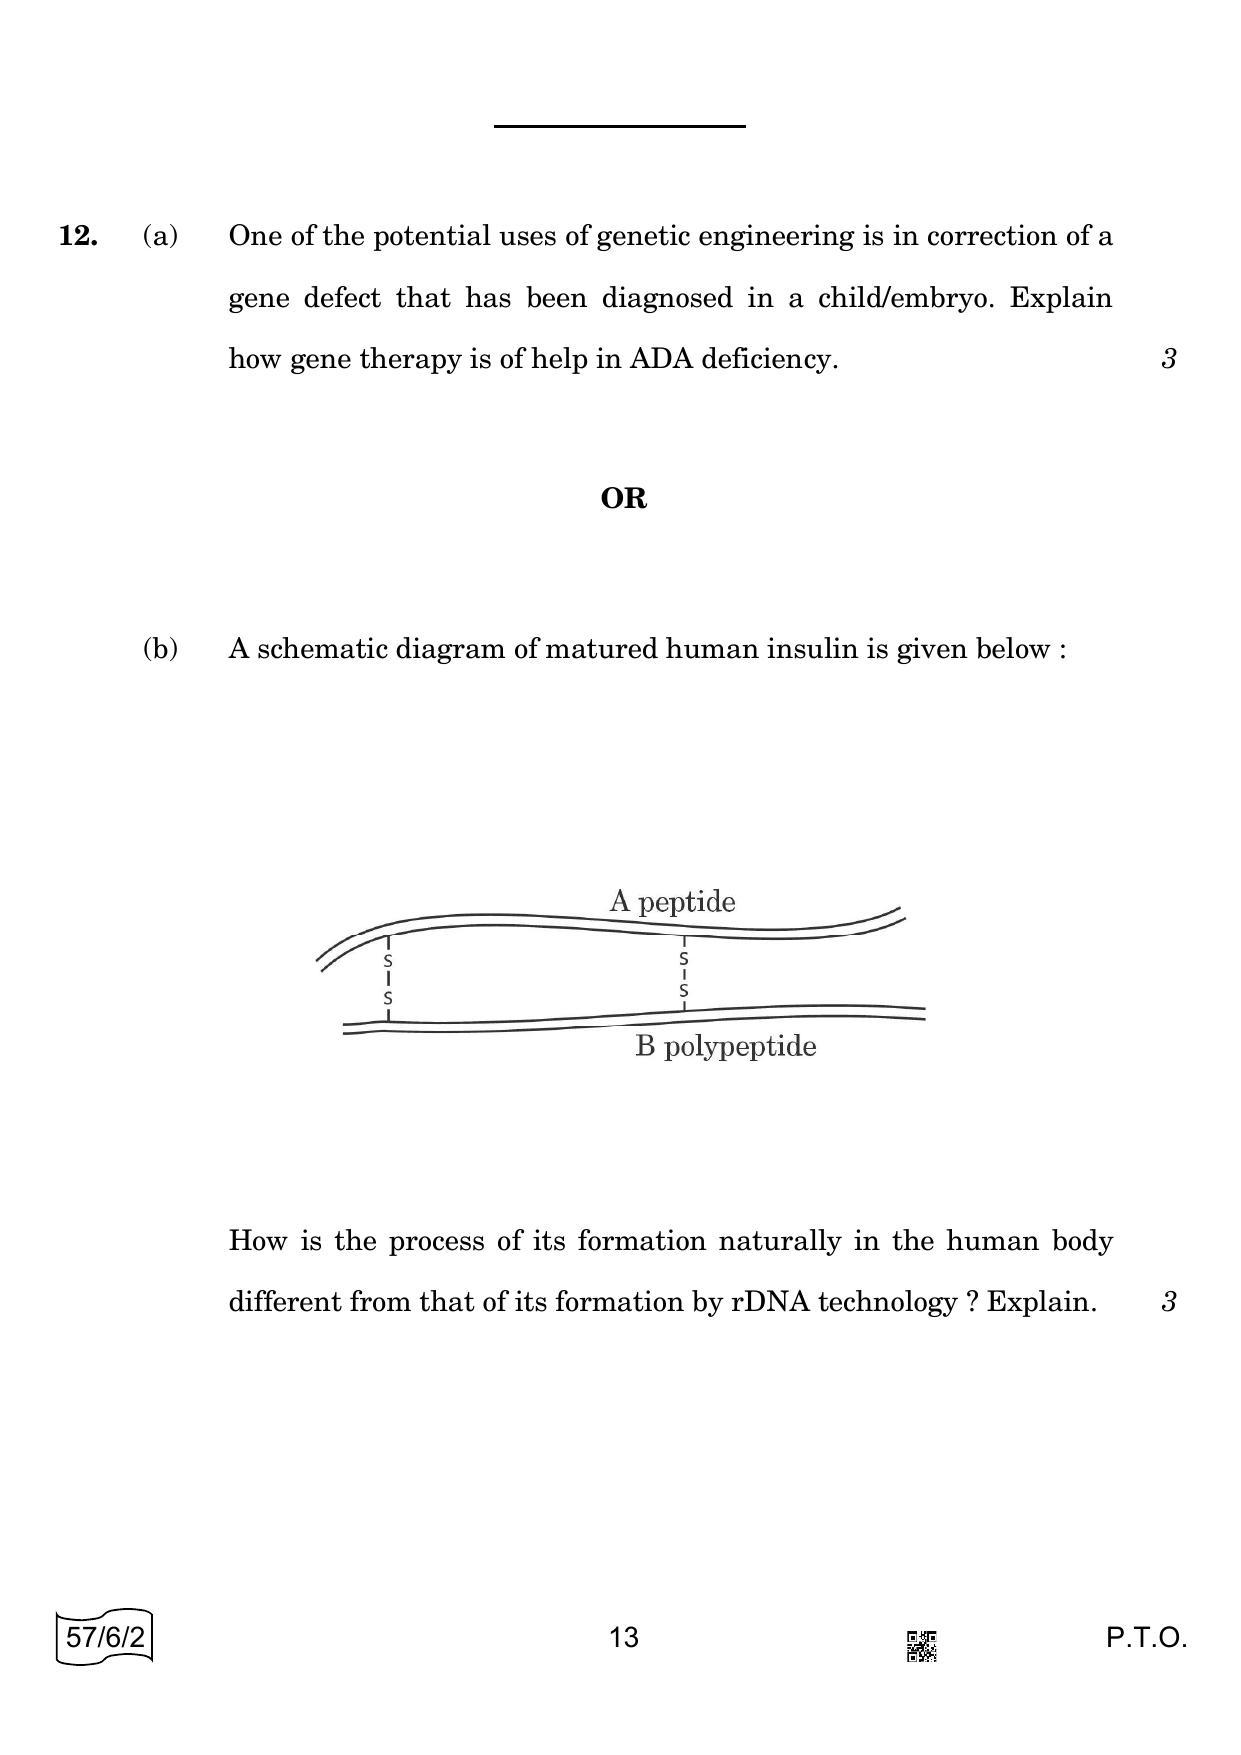 CBSE Class 12 57-6-2 BIOLOGY 2022 Compartment Question Paper - Page 13